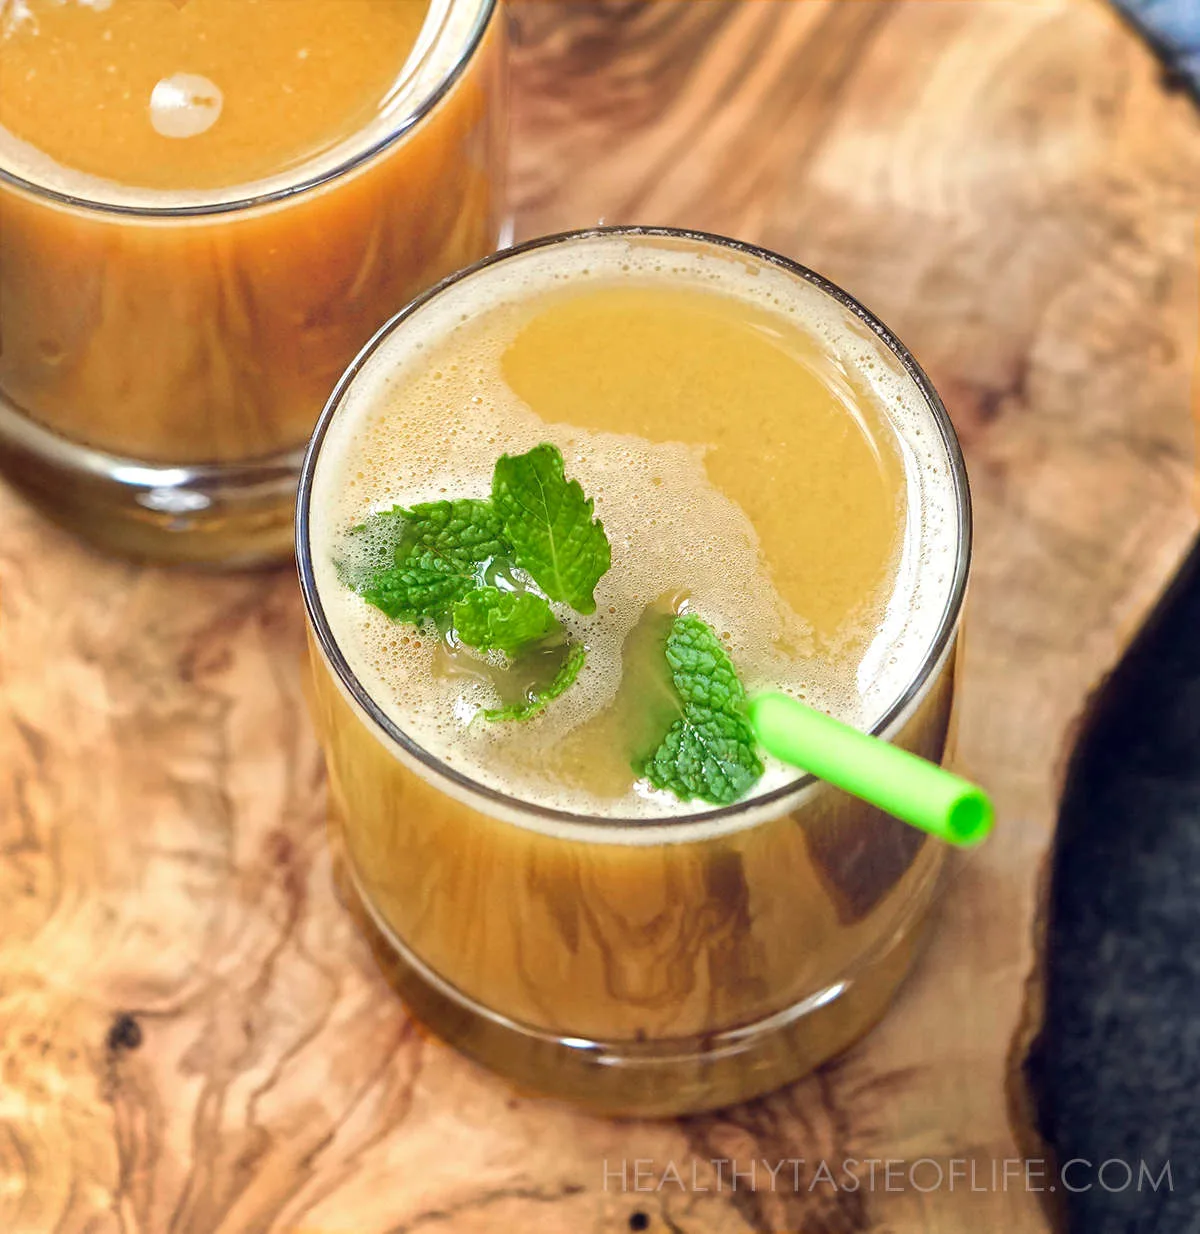 Cabbage juice in a glass garnished with mint leaves: raw cabbage juice with celery, carrot and apple.